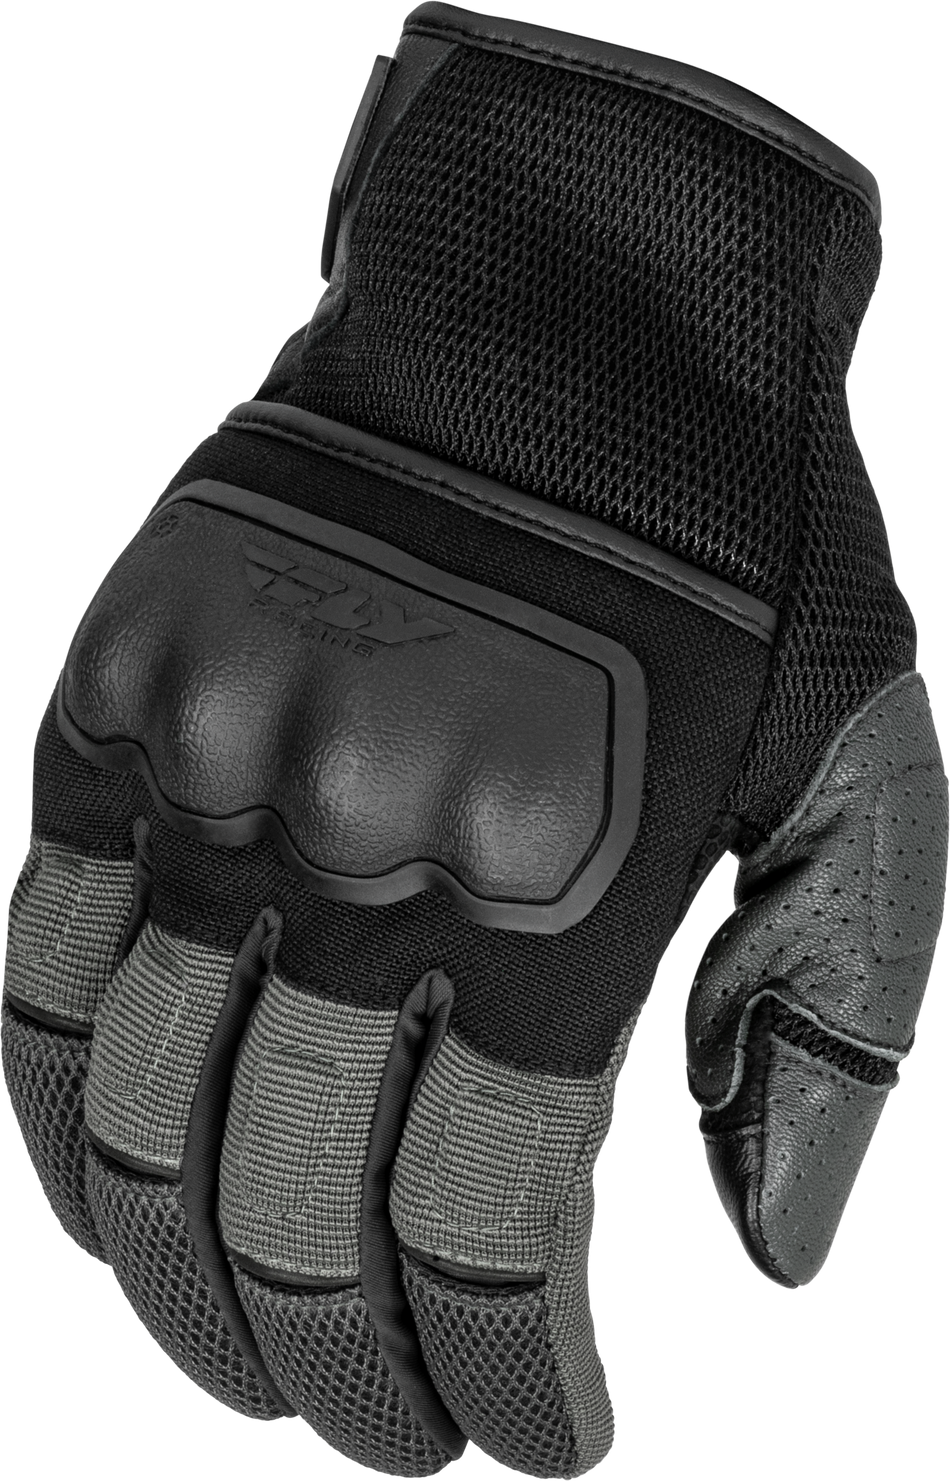 FLY RACING Coolpro Force Gloves Black/Grey Lg 476-4126L